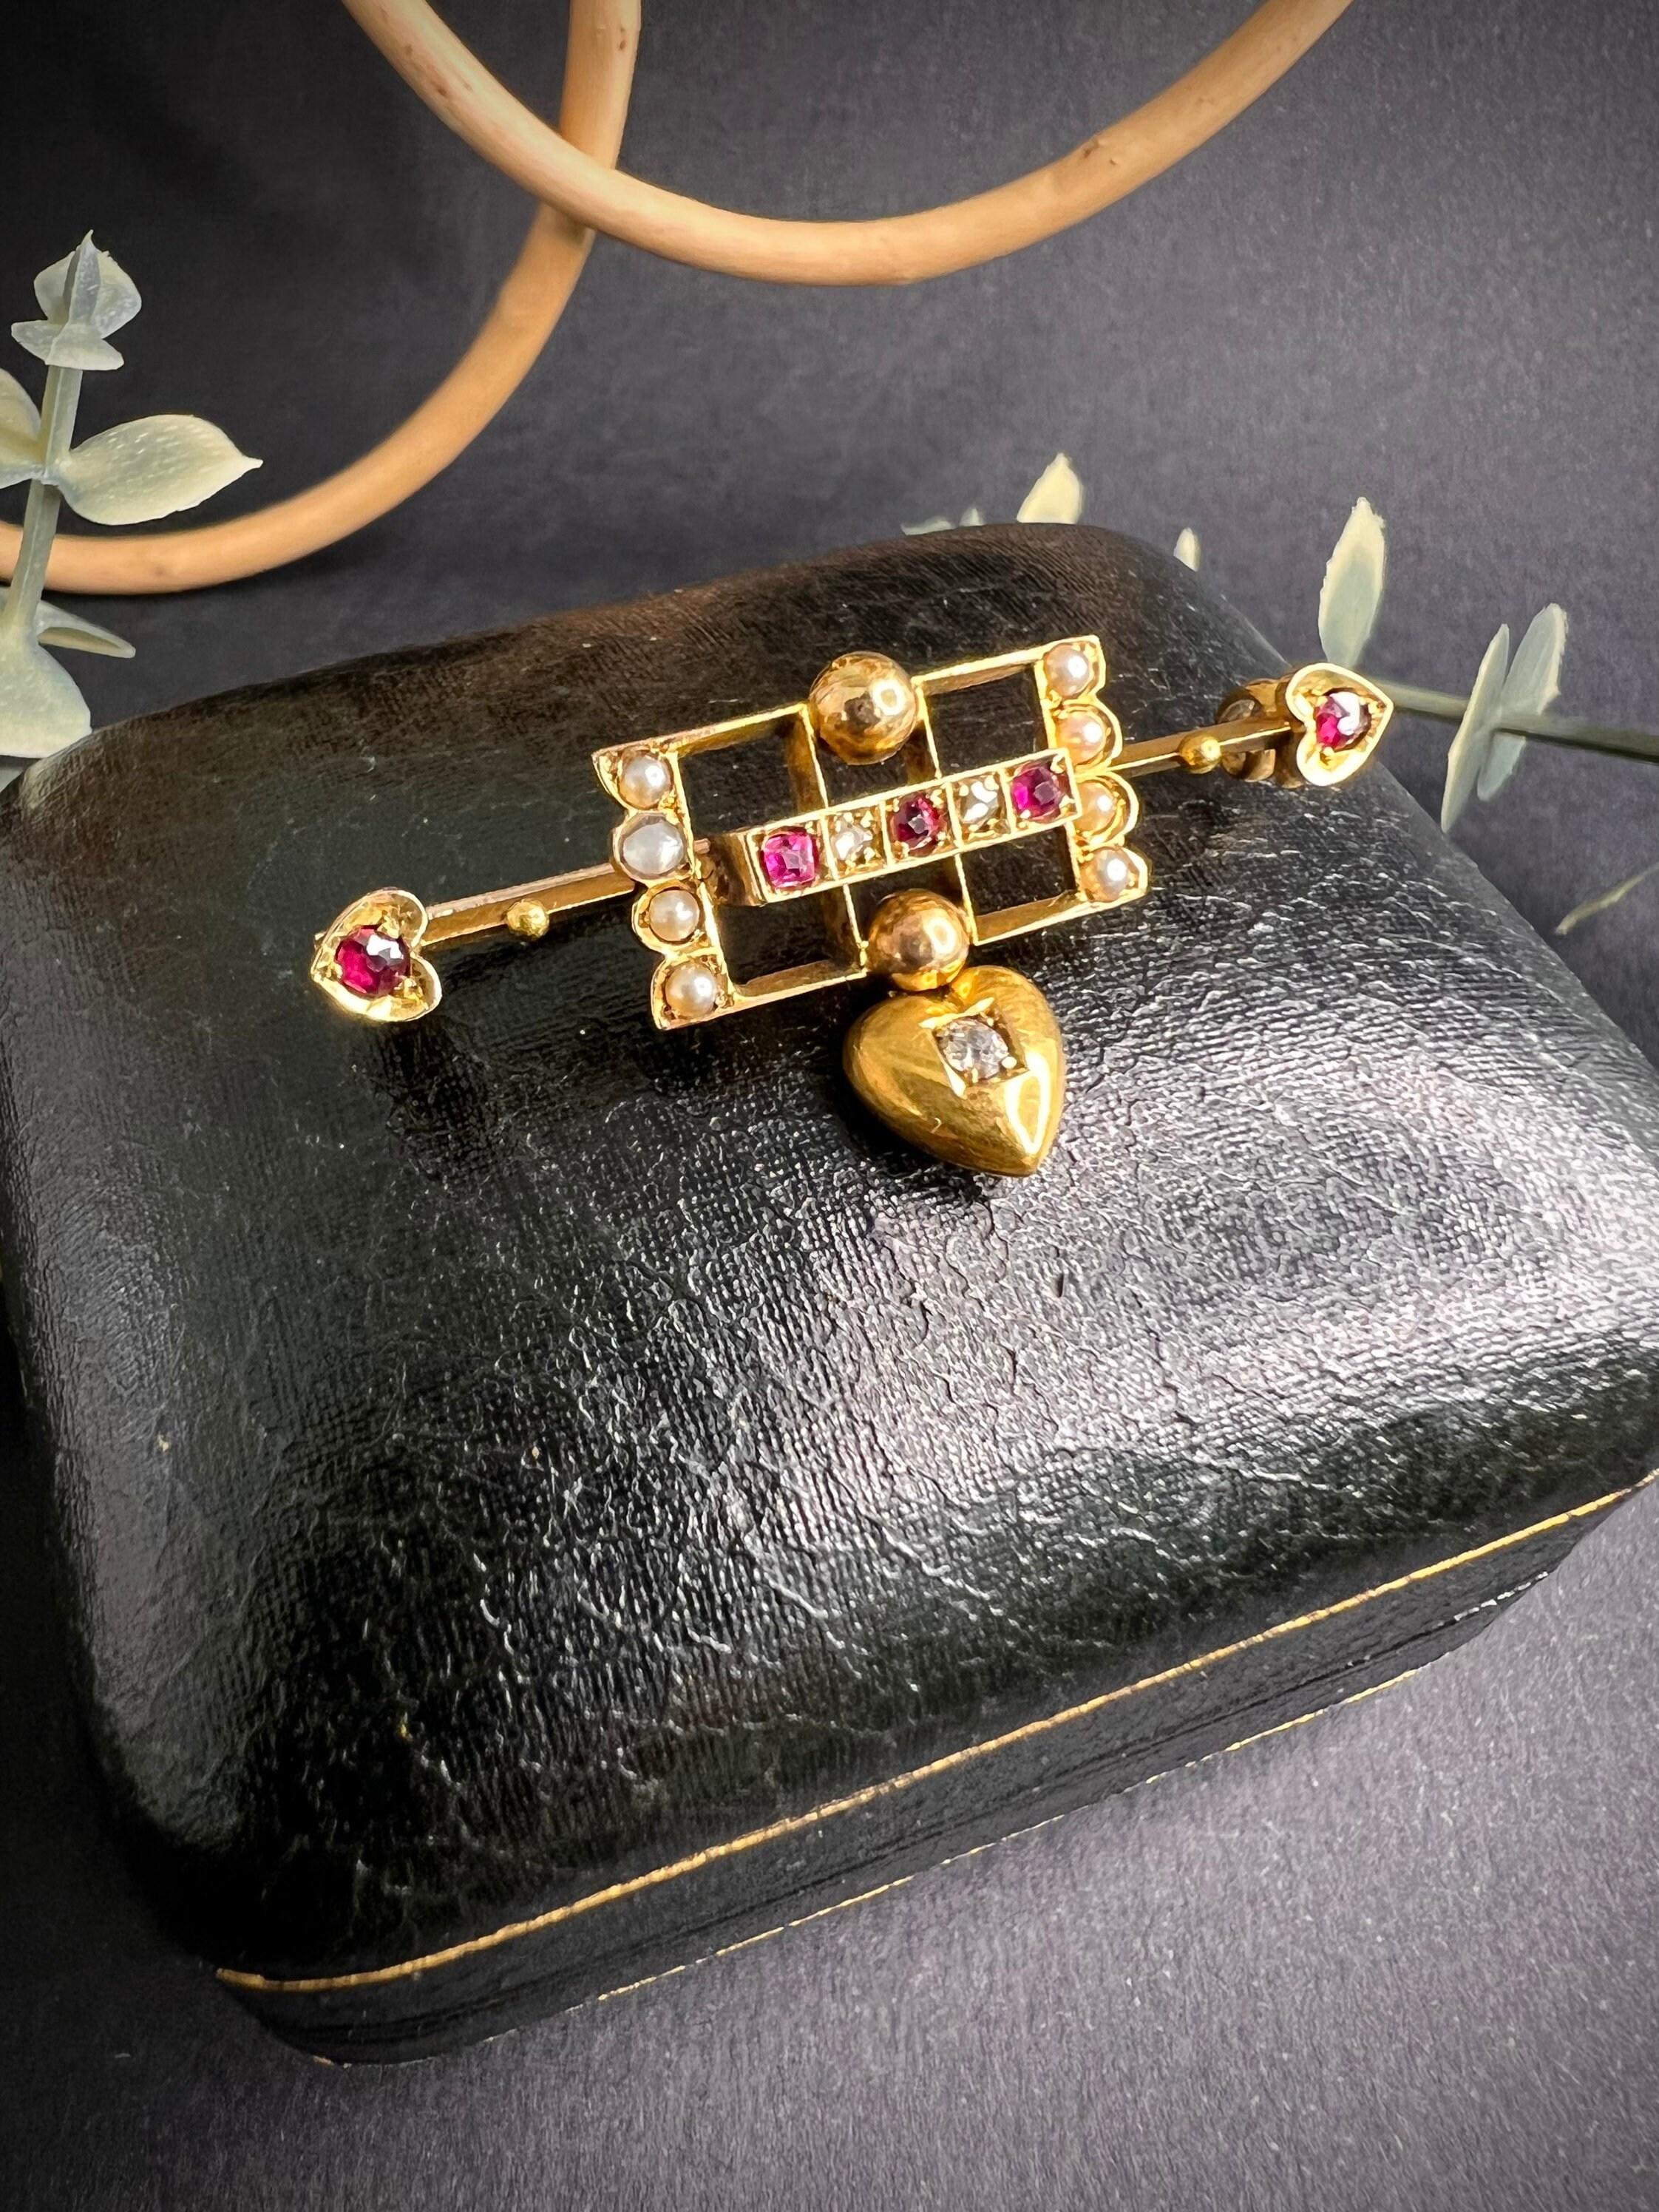 Antique Gold Heart Brooch

15ct Gold Stamped 

Circa 1880

Fabulous Victorian Gold Brooch. Set with Rubies, Diamonds & Pearls. 
Features Two Little Ruby Set Hearts at Either End & Diamond Set Heart Drop. 

Measures Approx Length 38.8mm & Width